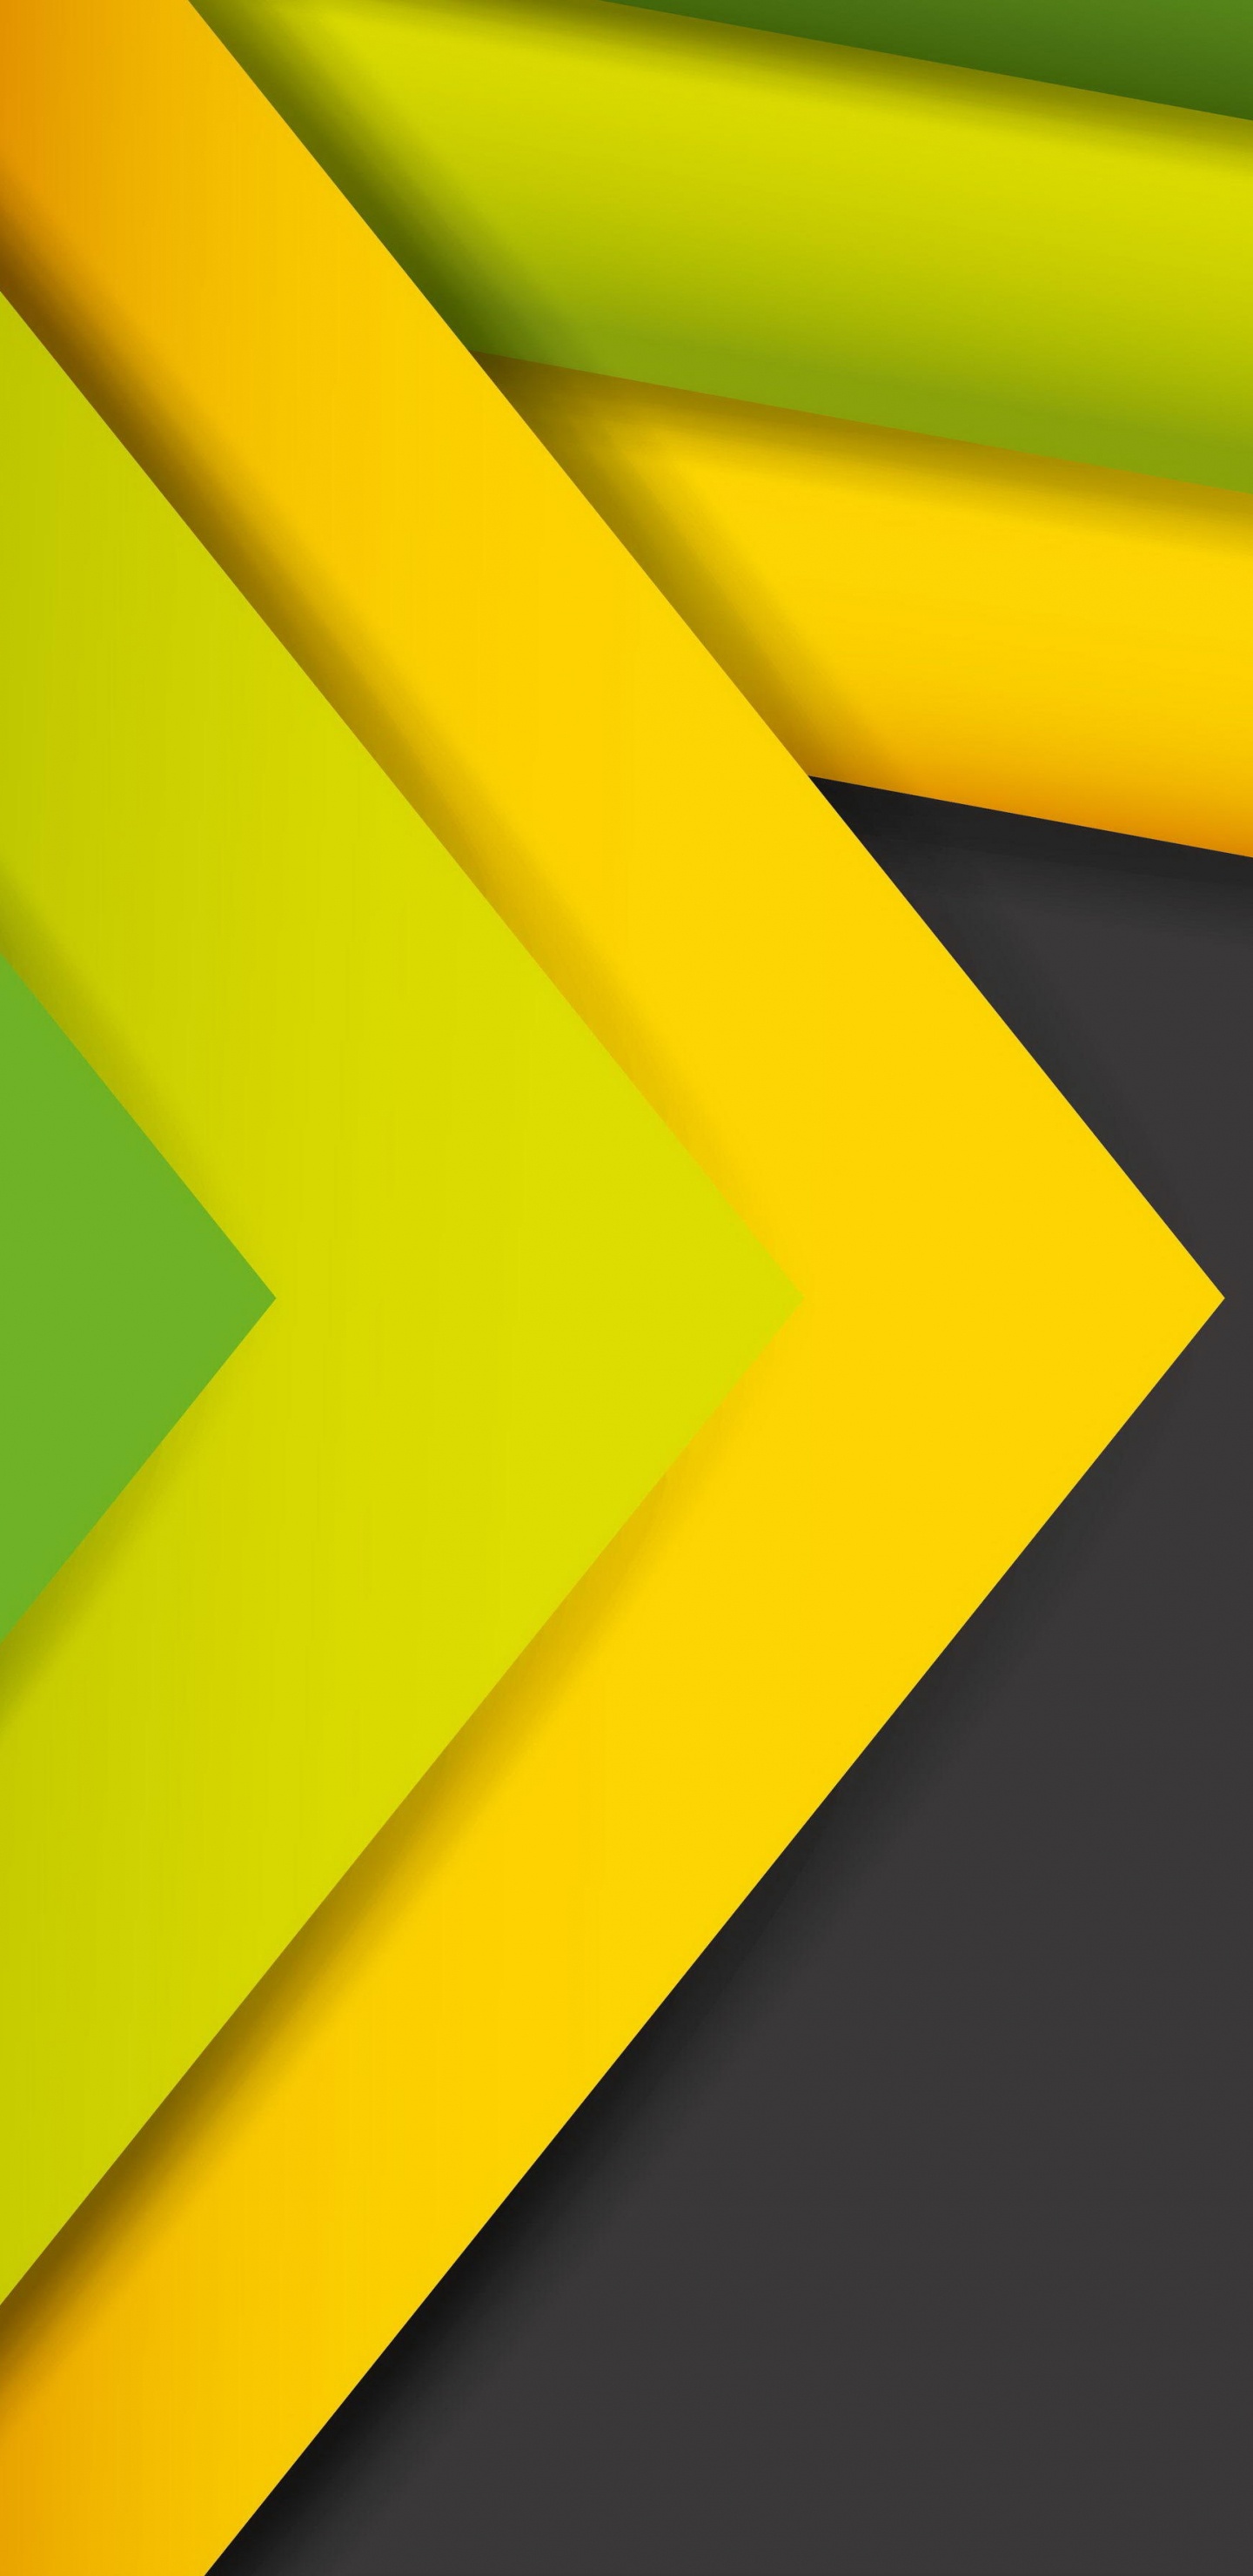 Yellow and Green Triangle Illustration. Wallpaper in 1440x2960 Resolution